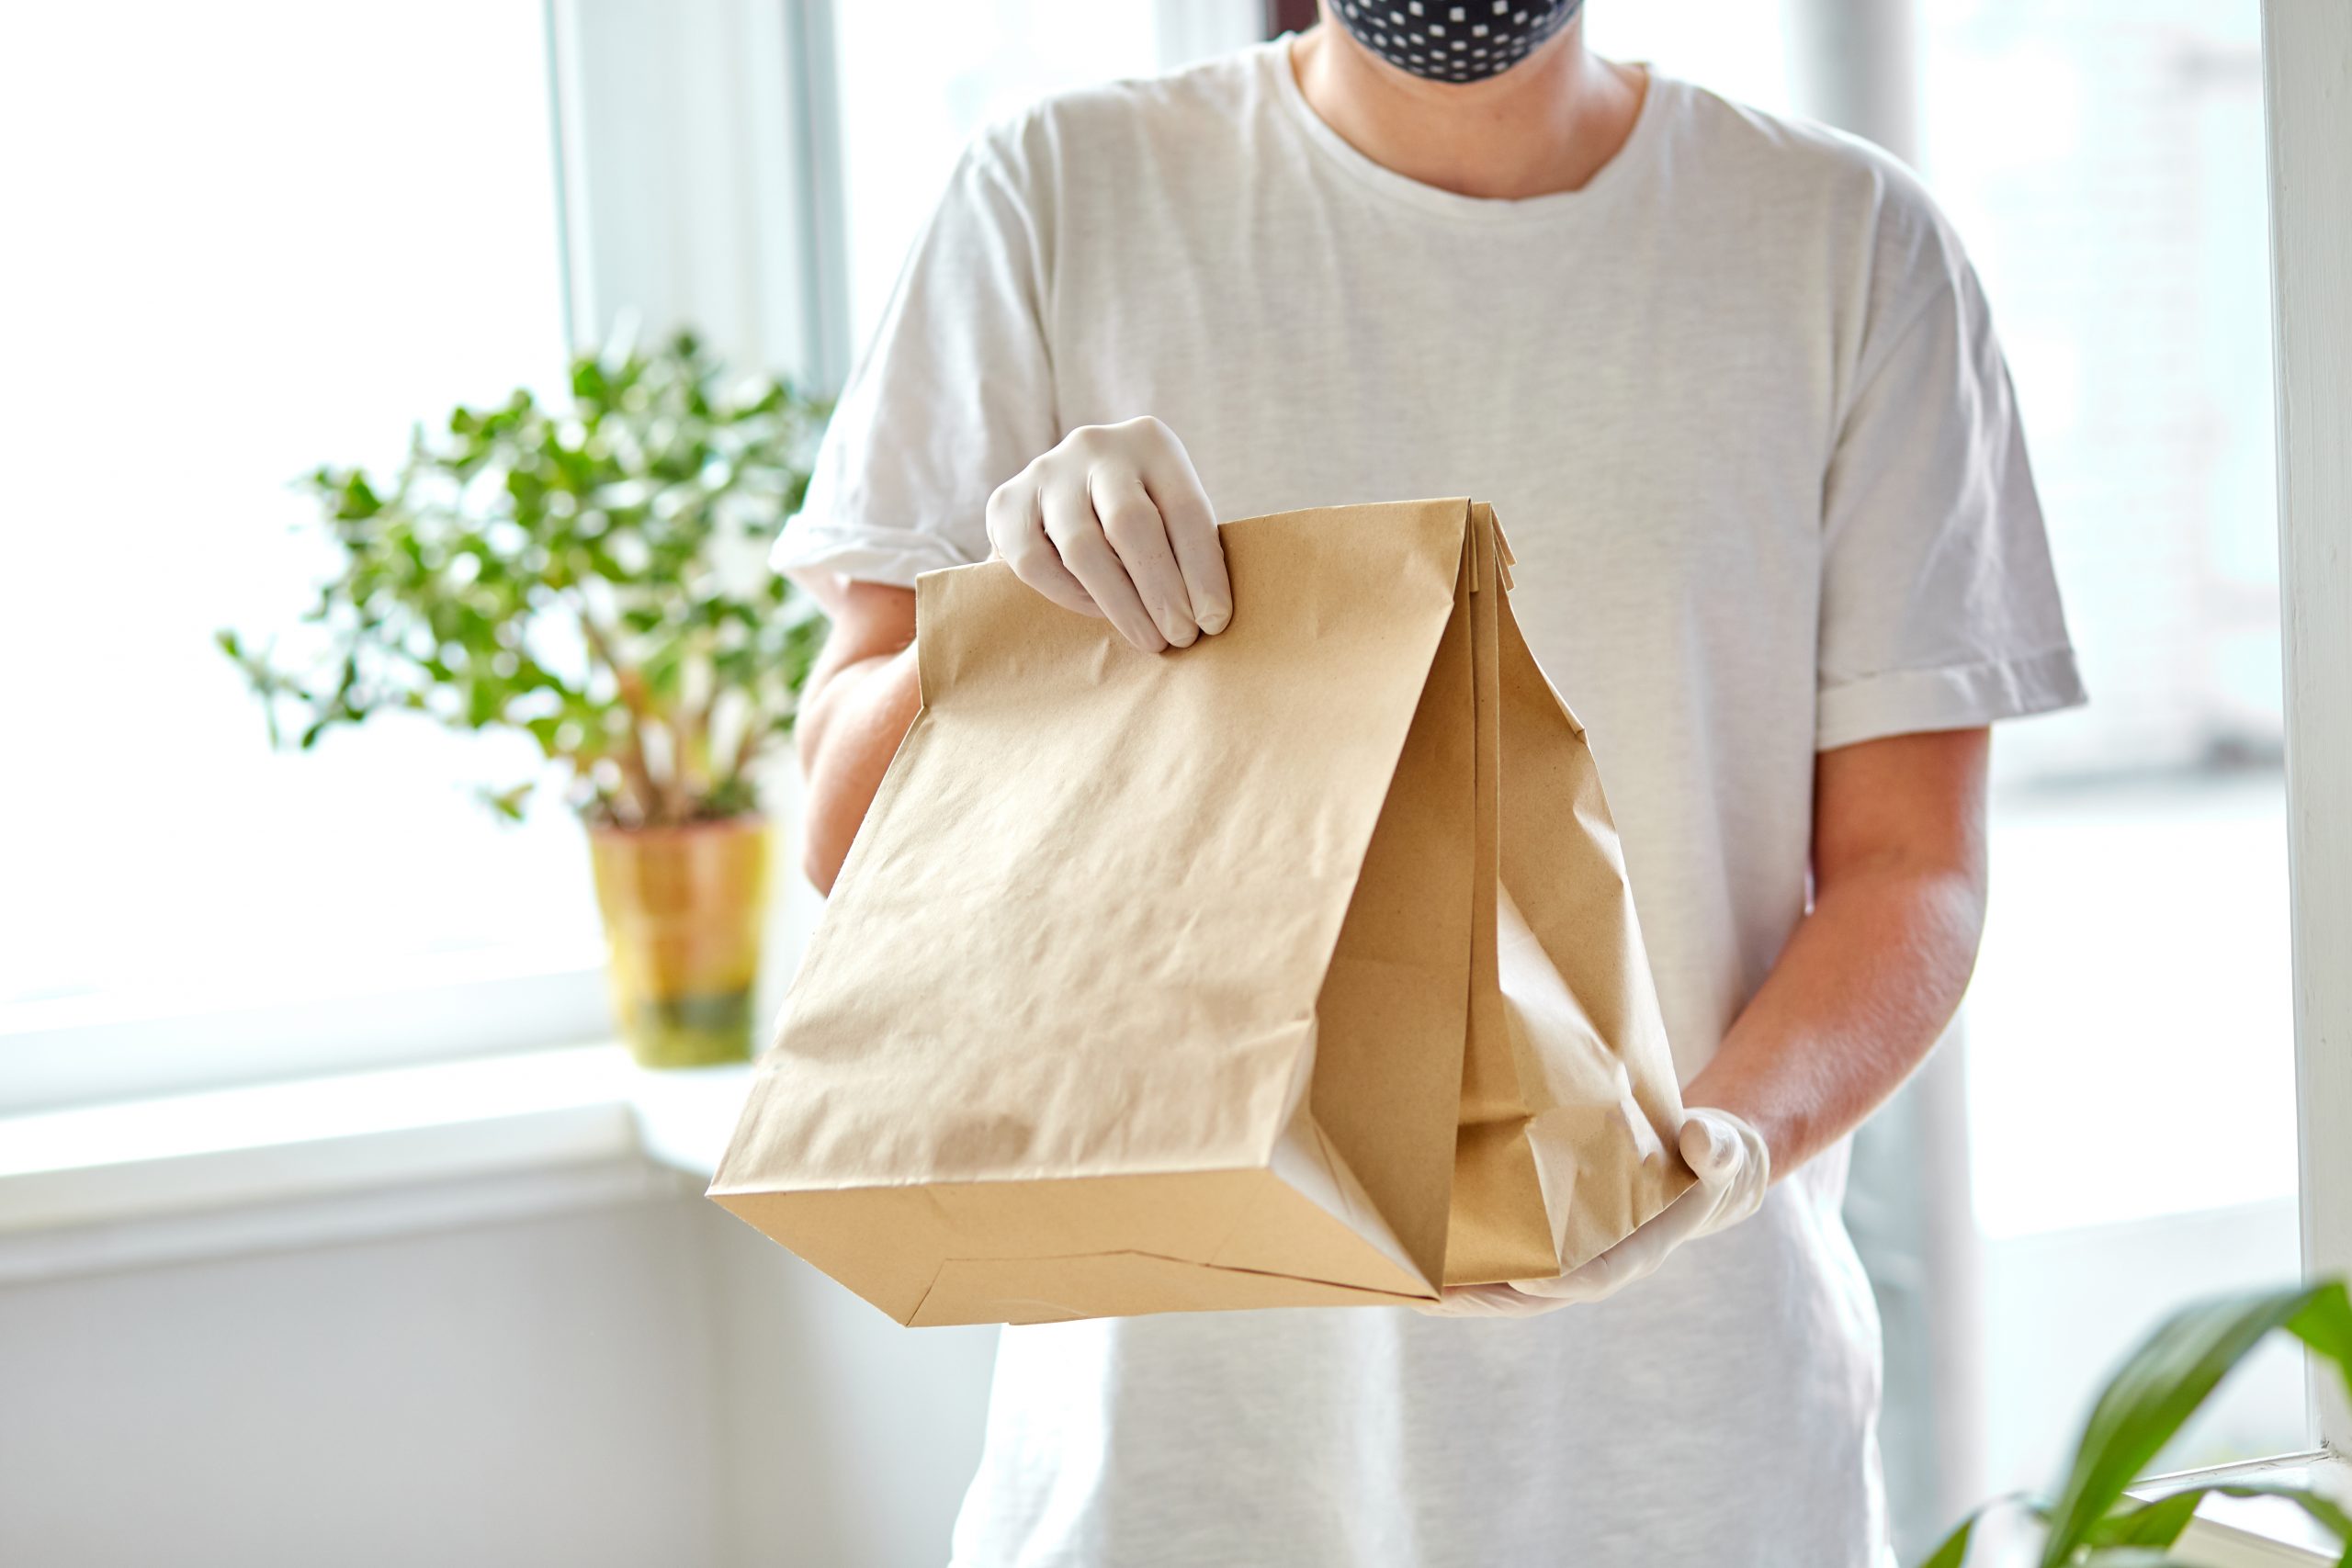 Courierin white hold go box food, delivery service, Takeaway restaurants food delivery to home door. Stay at home safe lives from coronavirus COVID-19 outbreak. Contactless delivery service under quarantine.